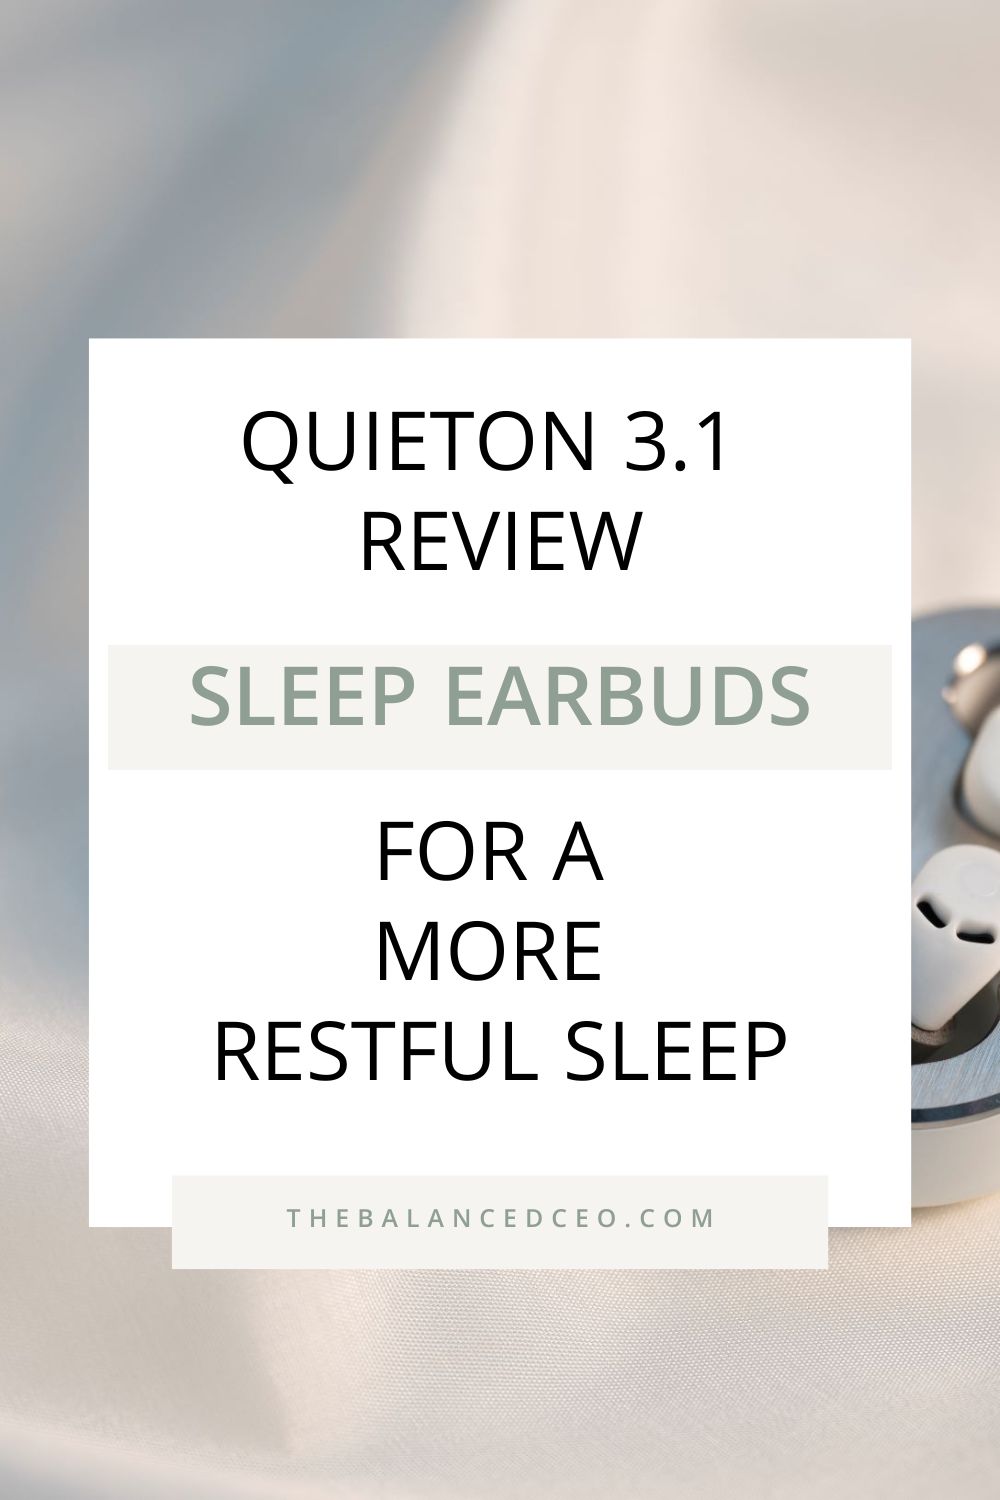 QuietOn 3.1 Review: Can These Earbuds Help You Achieve a More Restful Sleep?